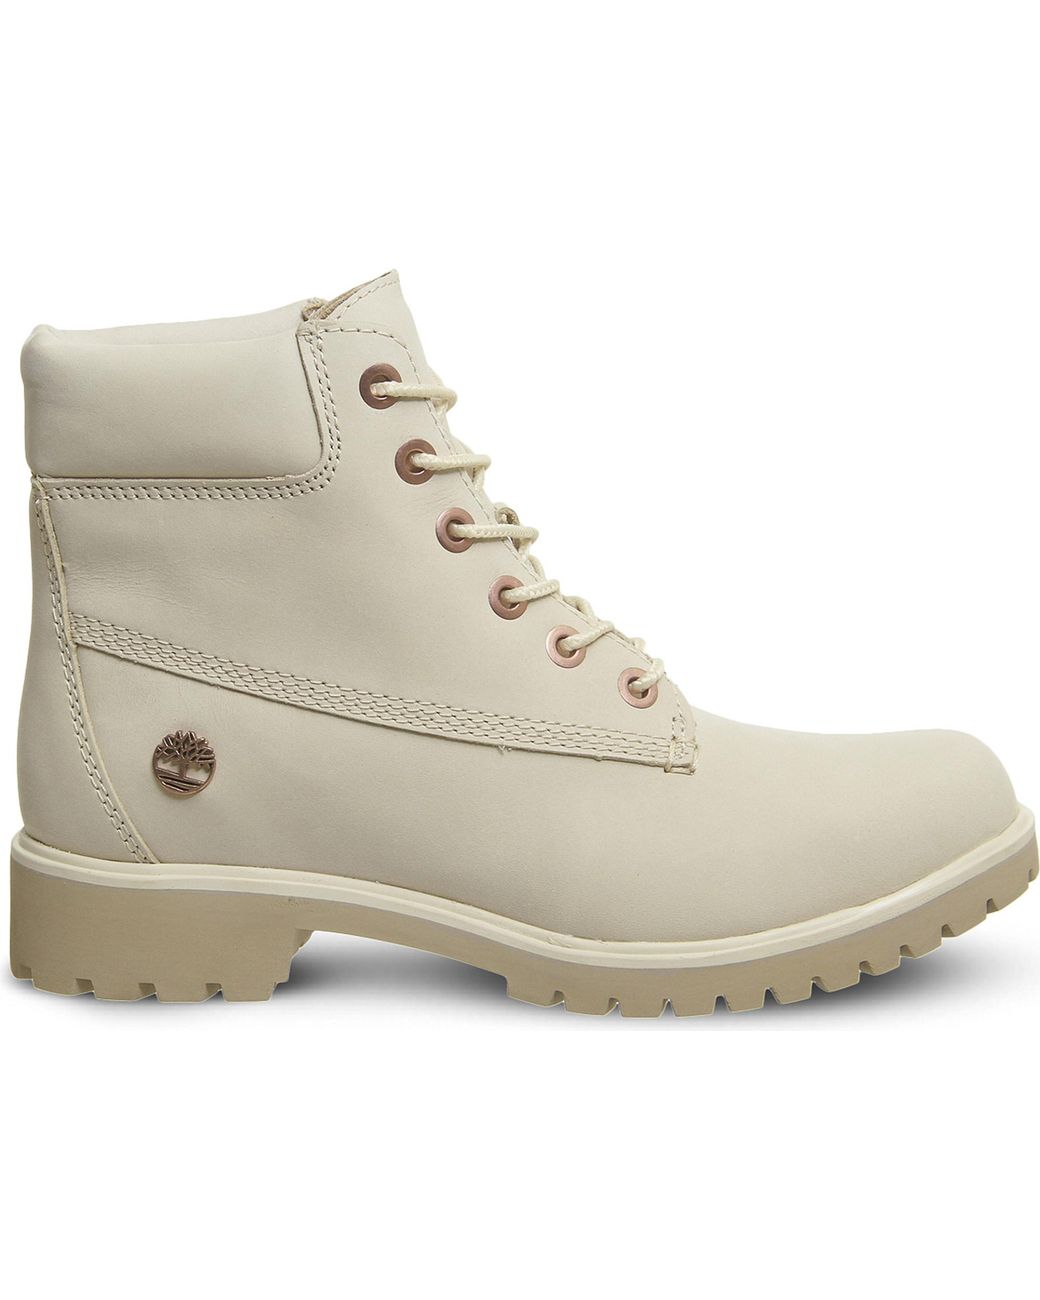 Timberland Slim Premium 6-inch Leather Boots in Natural | Lyst